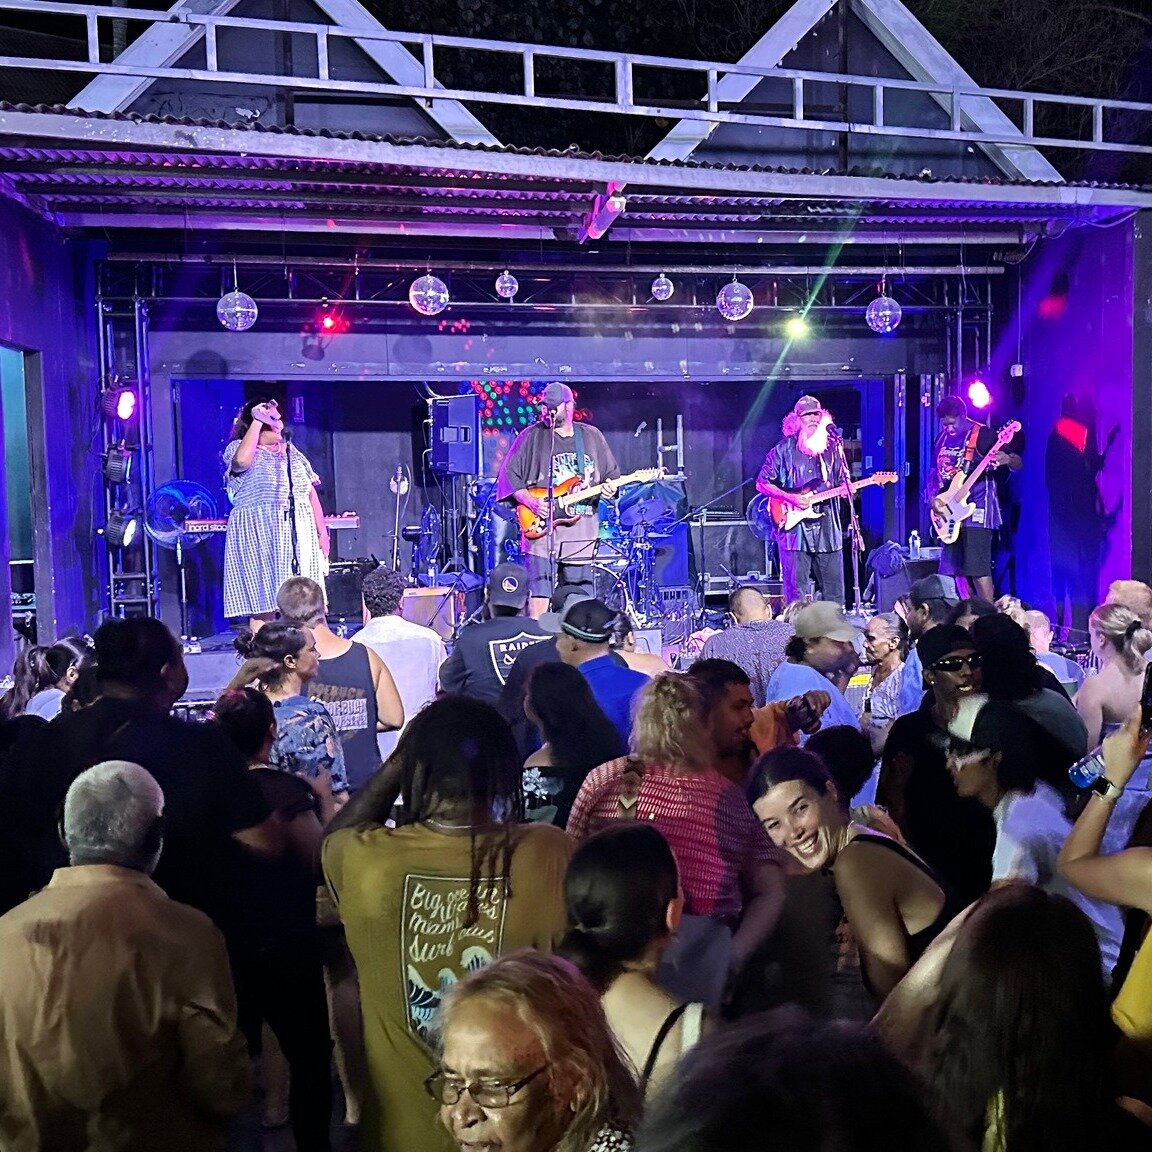 Some feel good news for your week...

A huge THANK YOU to everyone who came out to last Friday's Live Music with the Family Shoveller Band in Oasis 🎸🌴

Just for coming along &amp; supporting the show, you have helped to contribute $1,500 to the ban